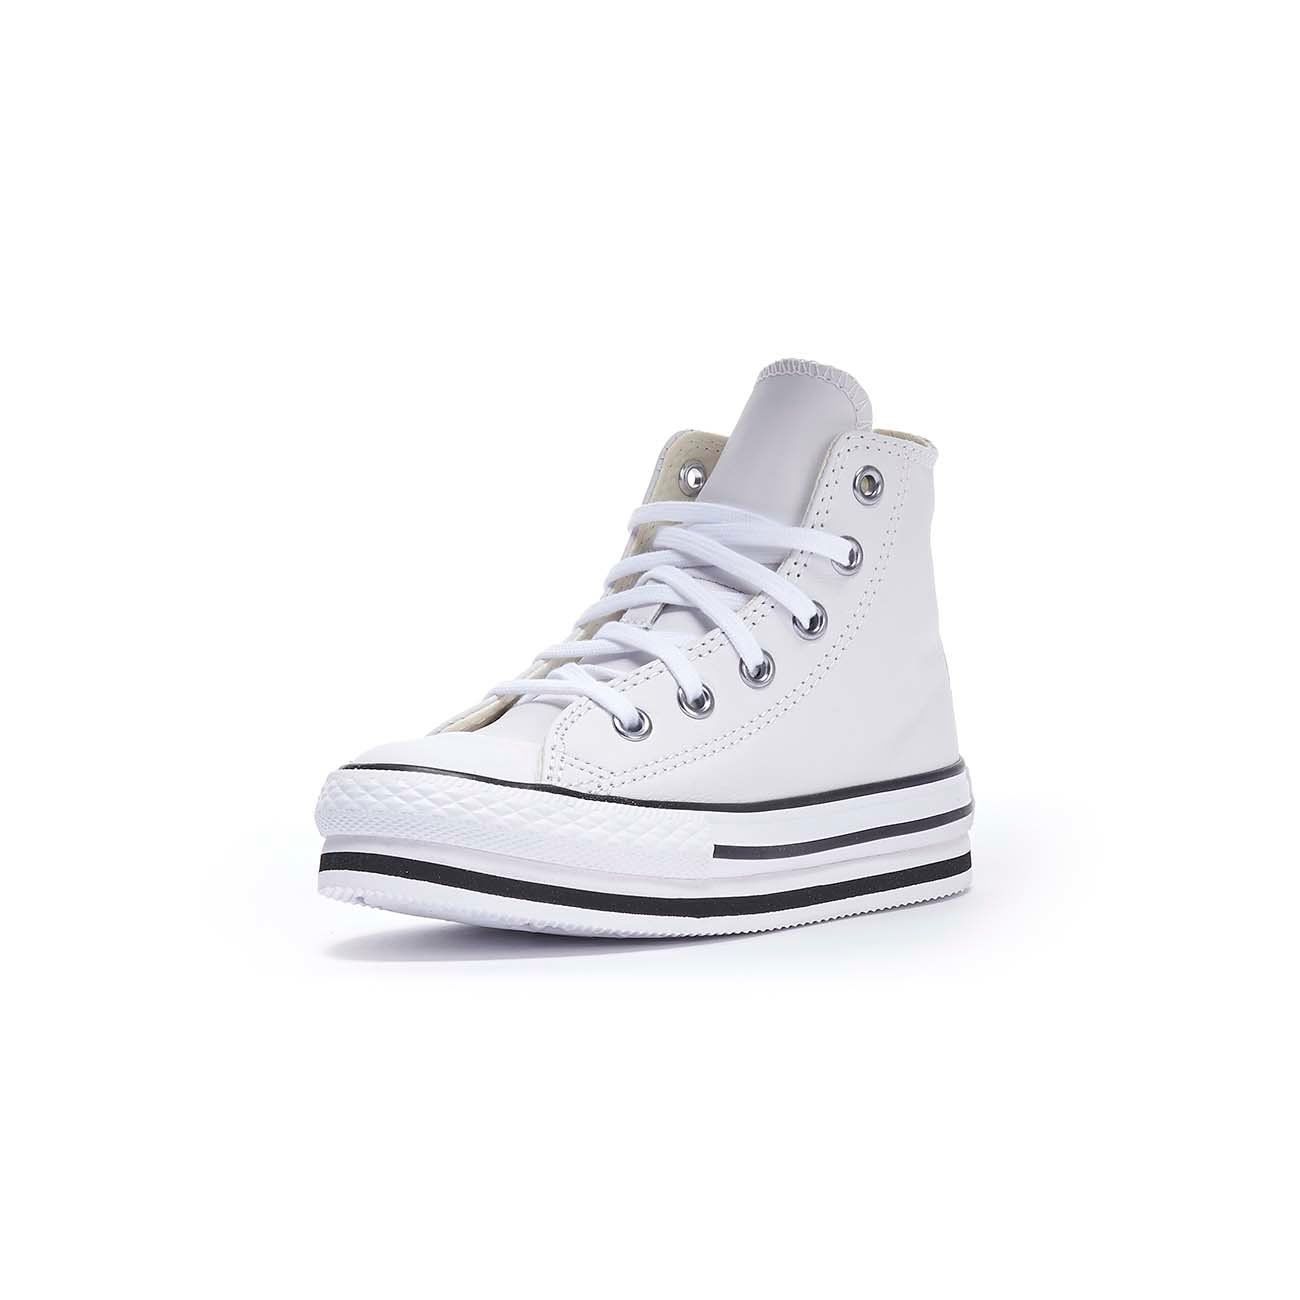 CONVERSE SNEAKERS LEATHER CHUCK TAYLOR ALL STAR PLATFORM Kid White